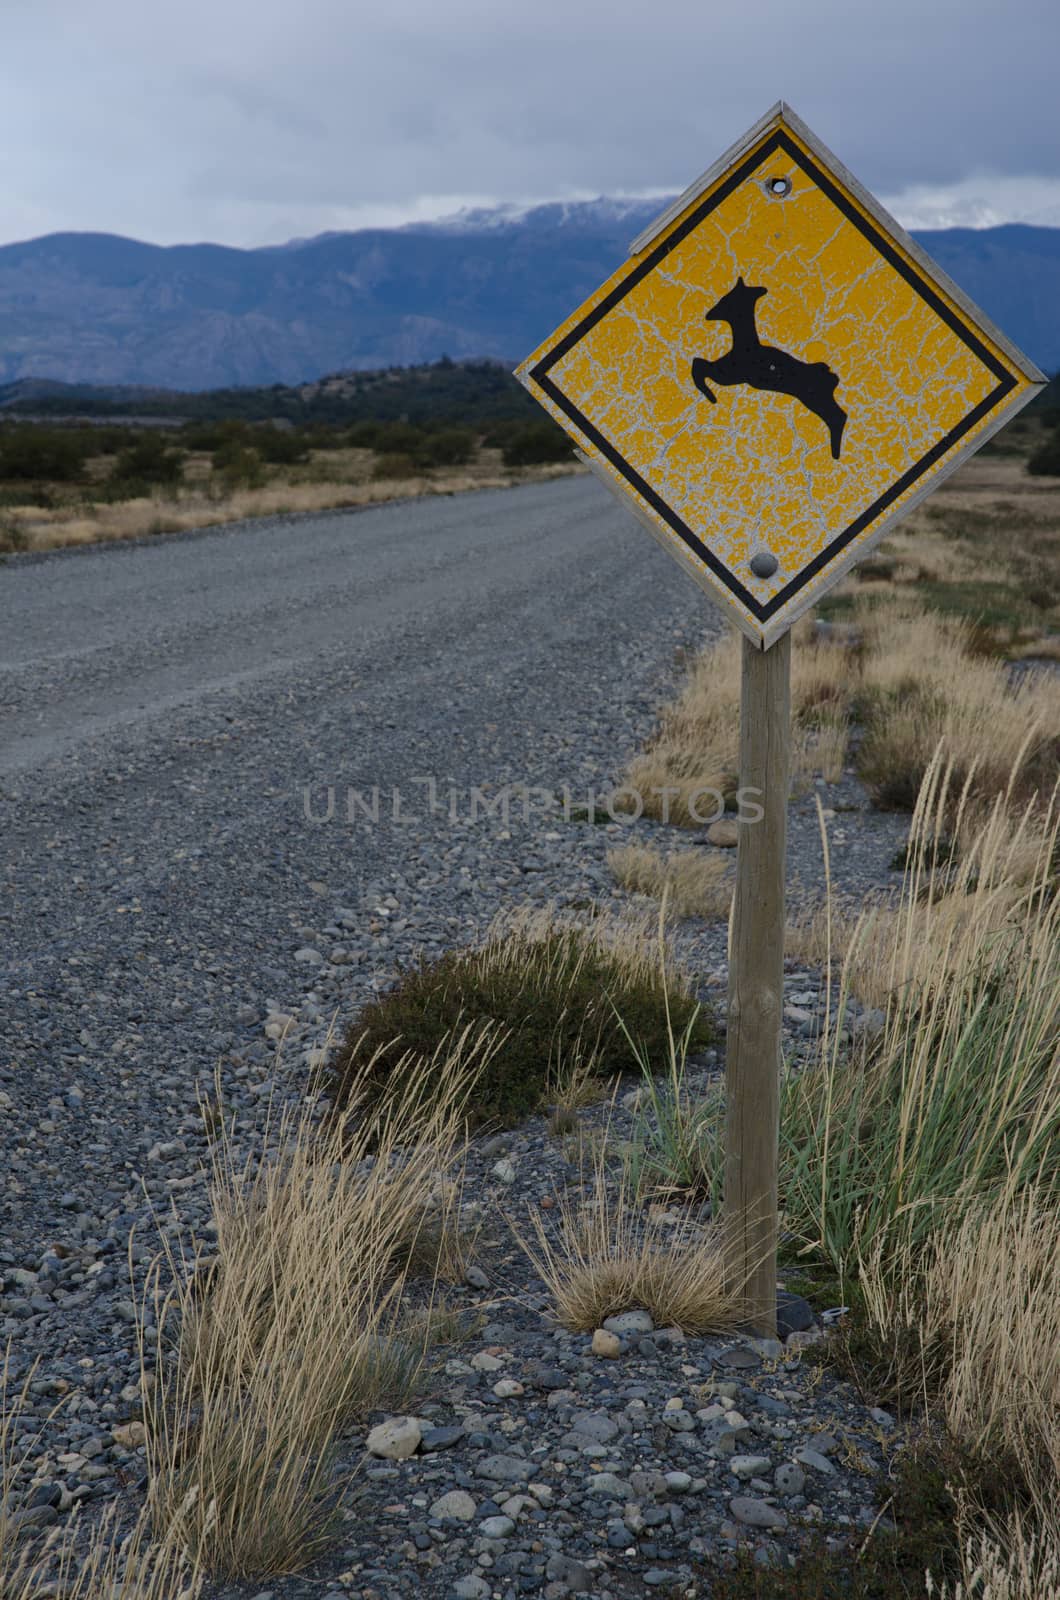 South Andean deer Hippocamelus bisulcus crossing signal. by VictorSuarez